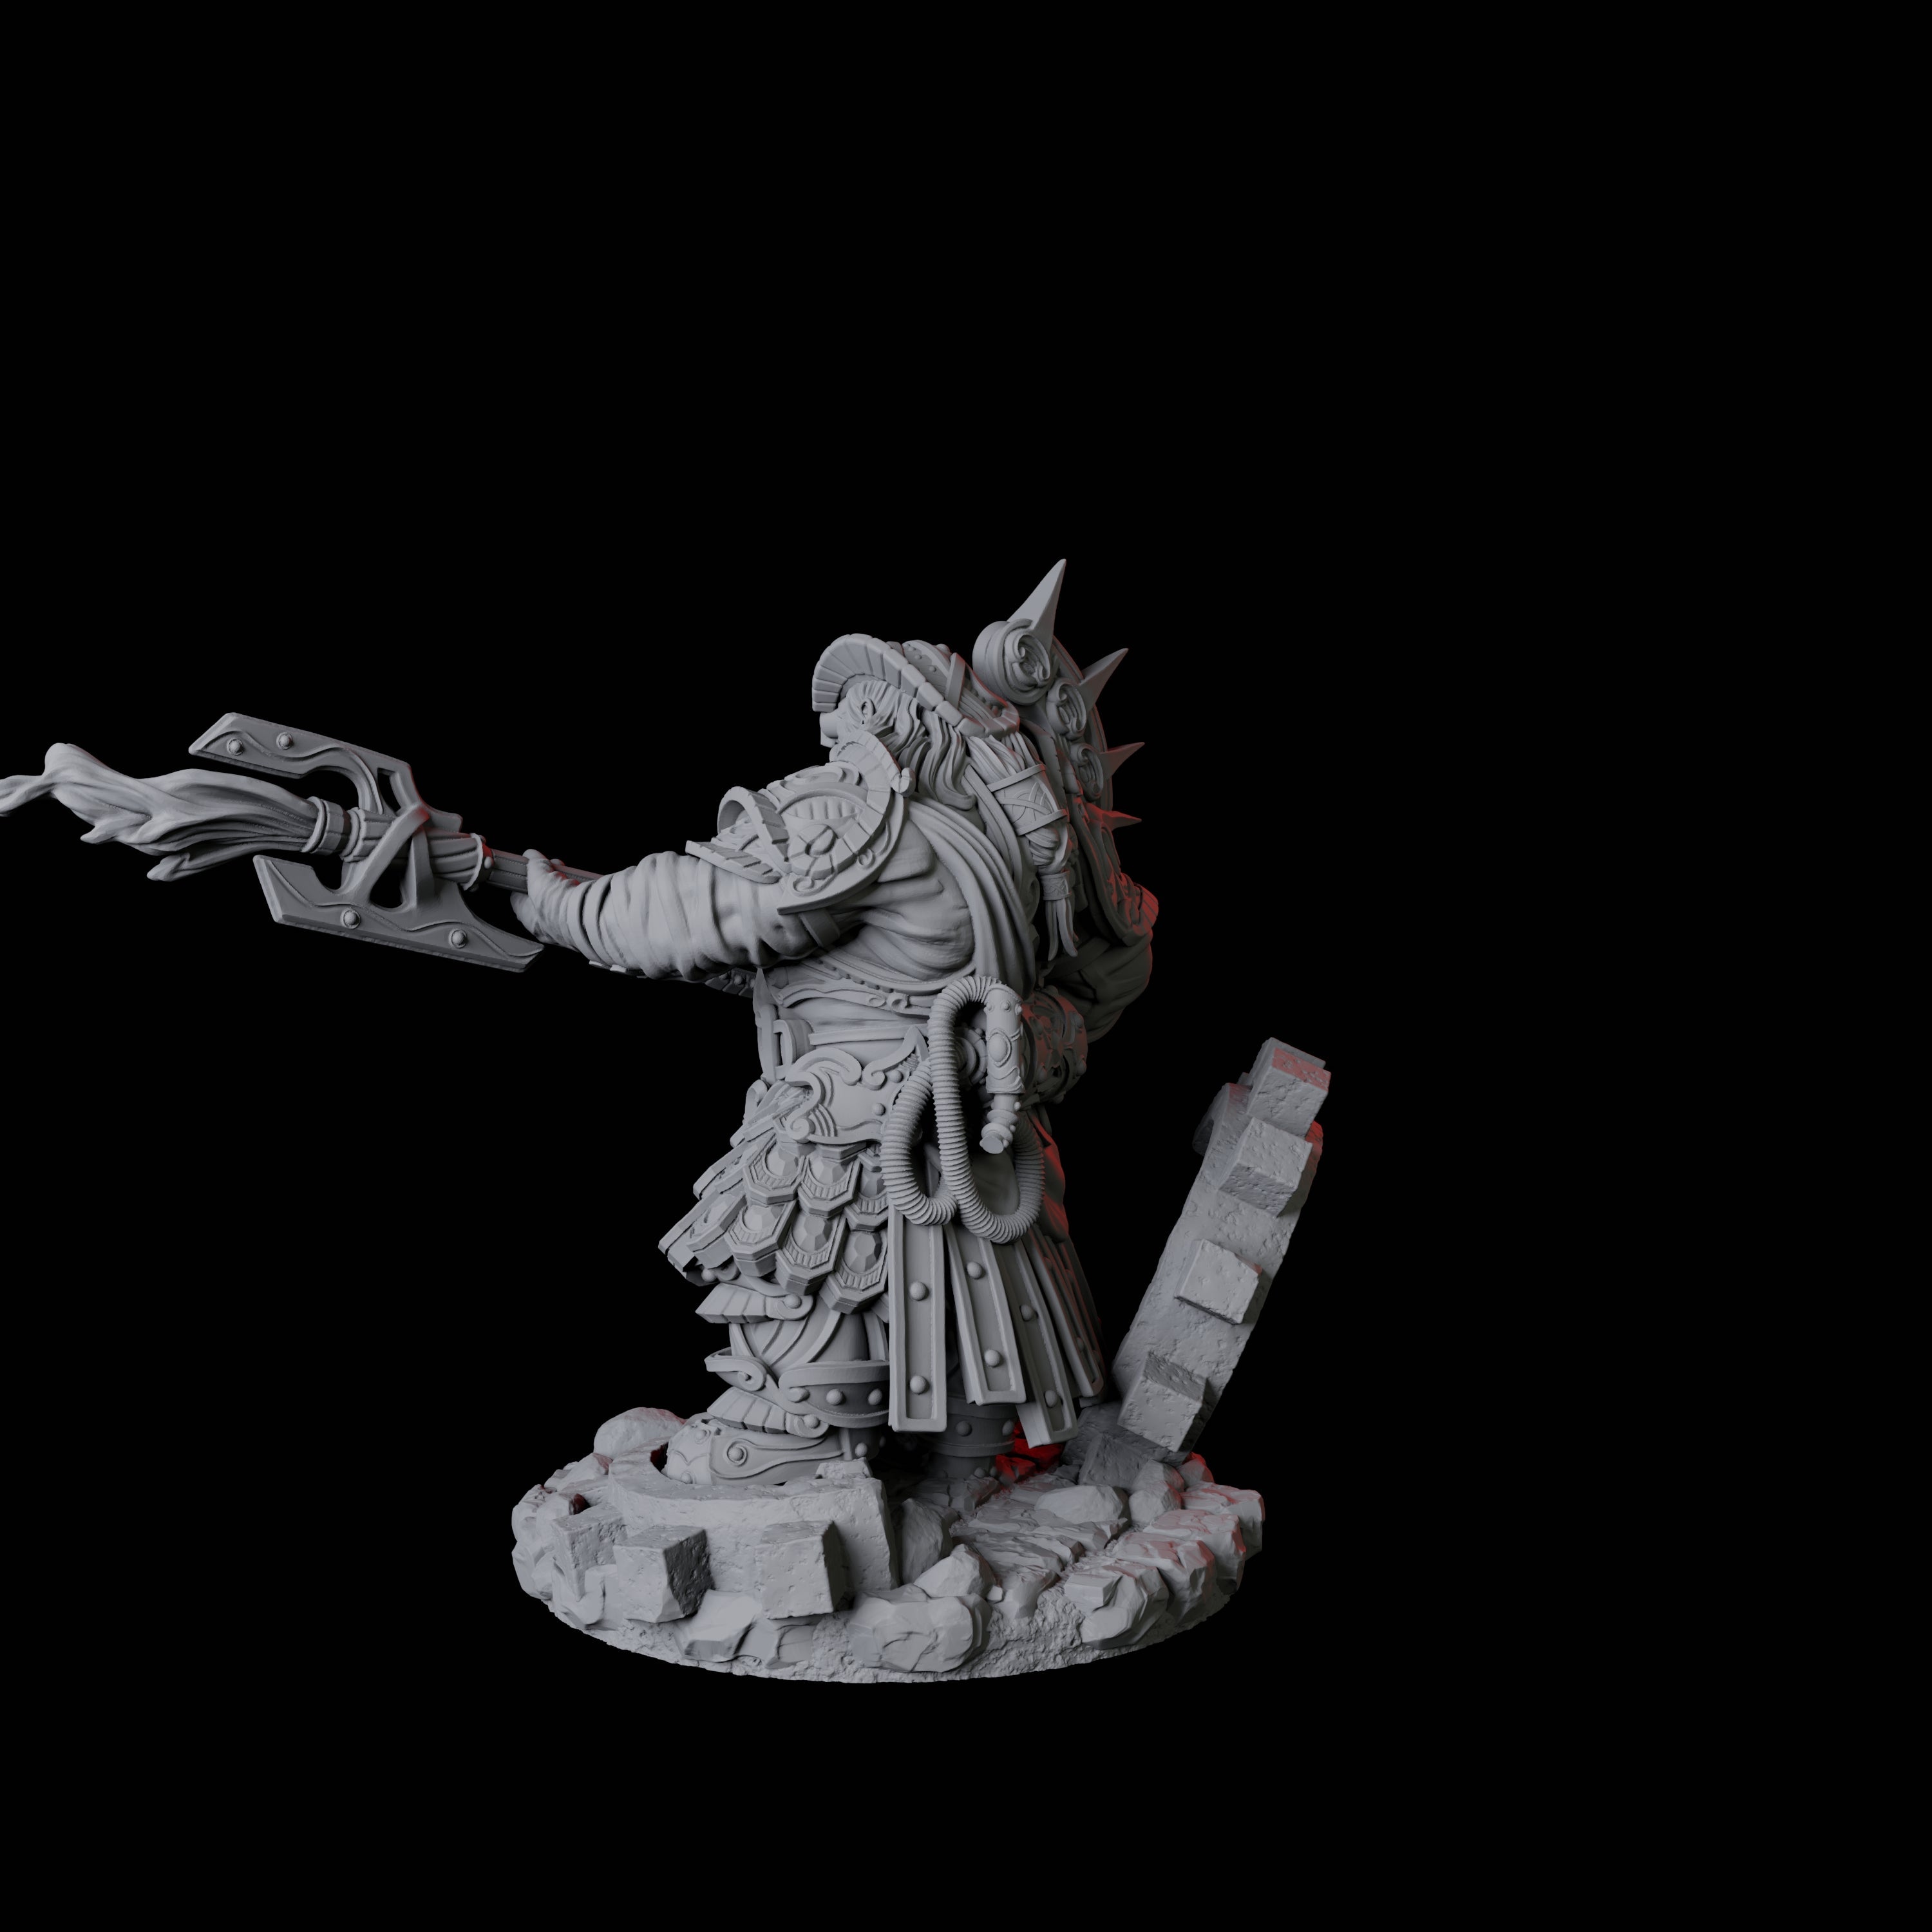 Dwarf Artificer Engineer C Miniature for Dungeons and Dragons, Pathfinder or other TTRPGs